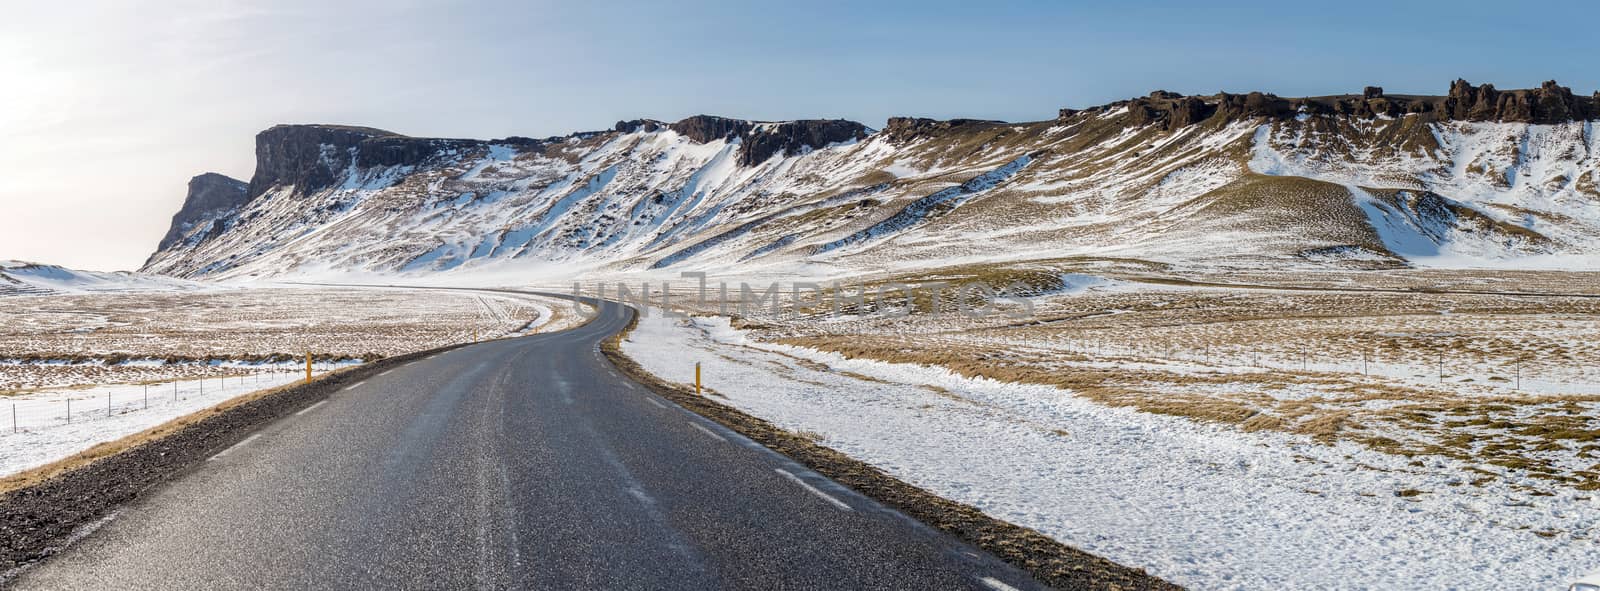 Road Winter Mountain Iceland by vichie81